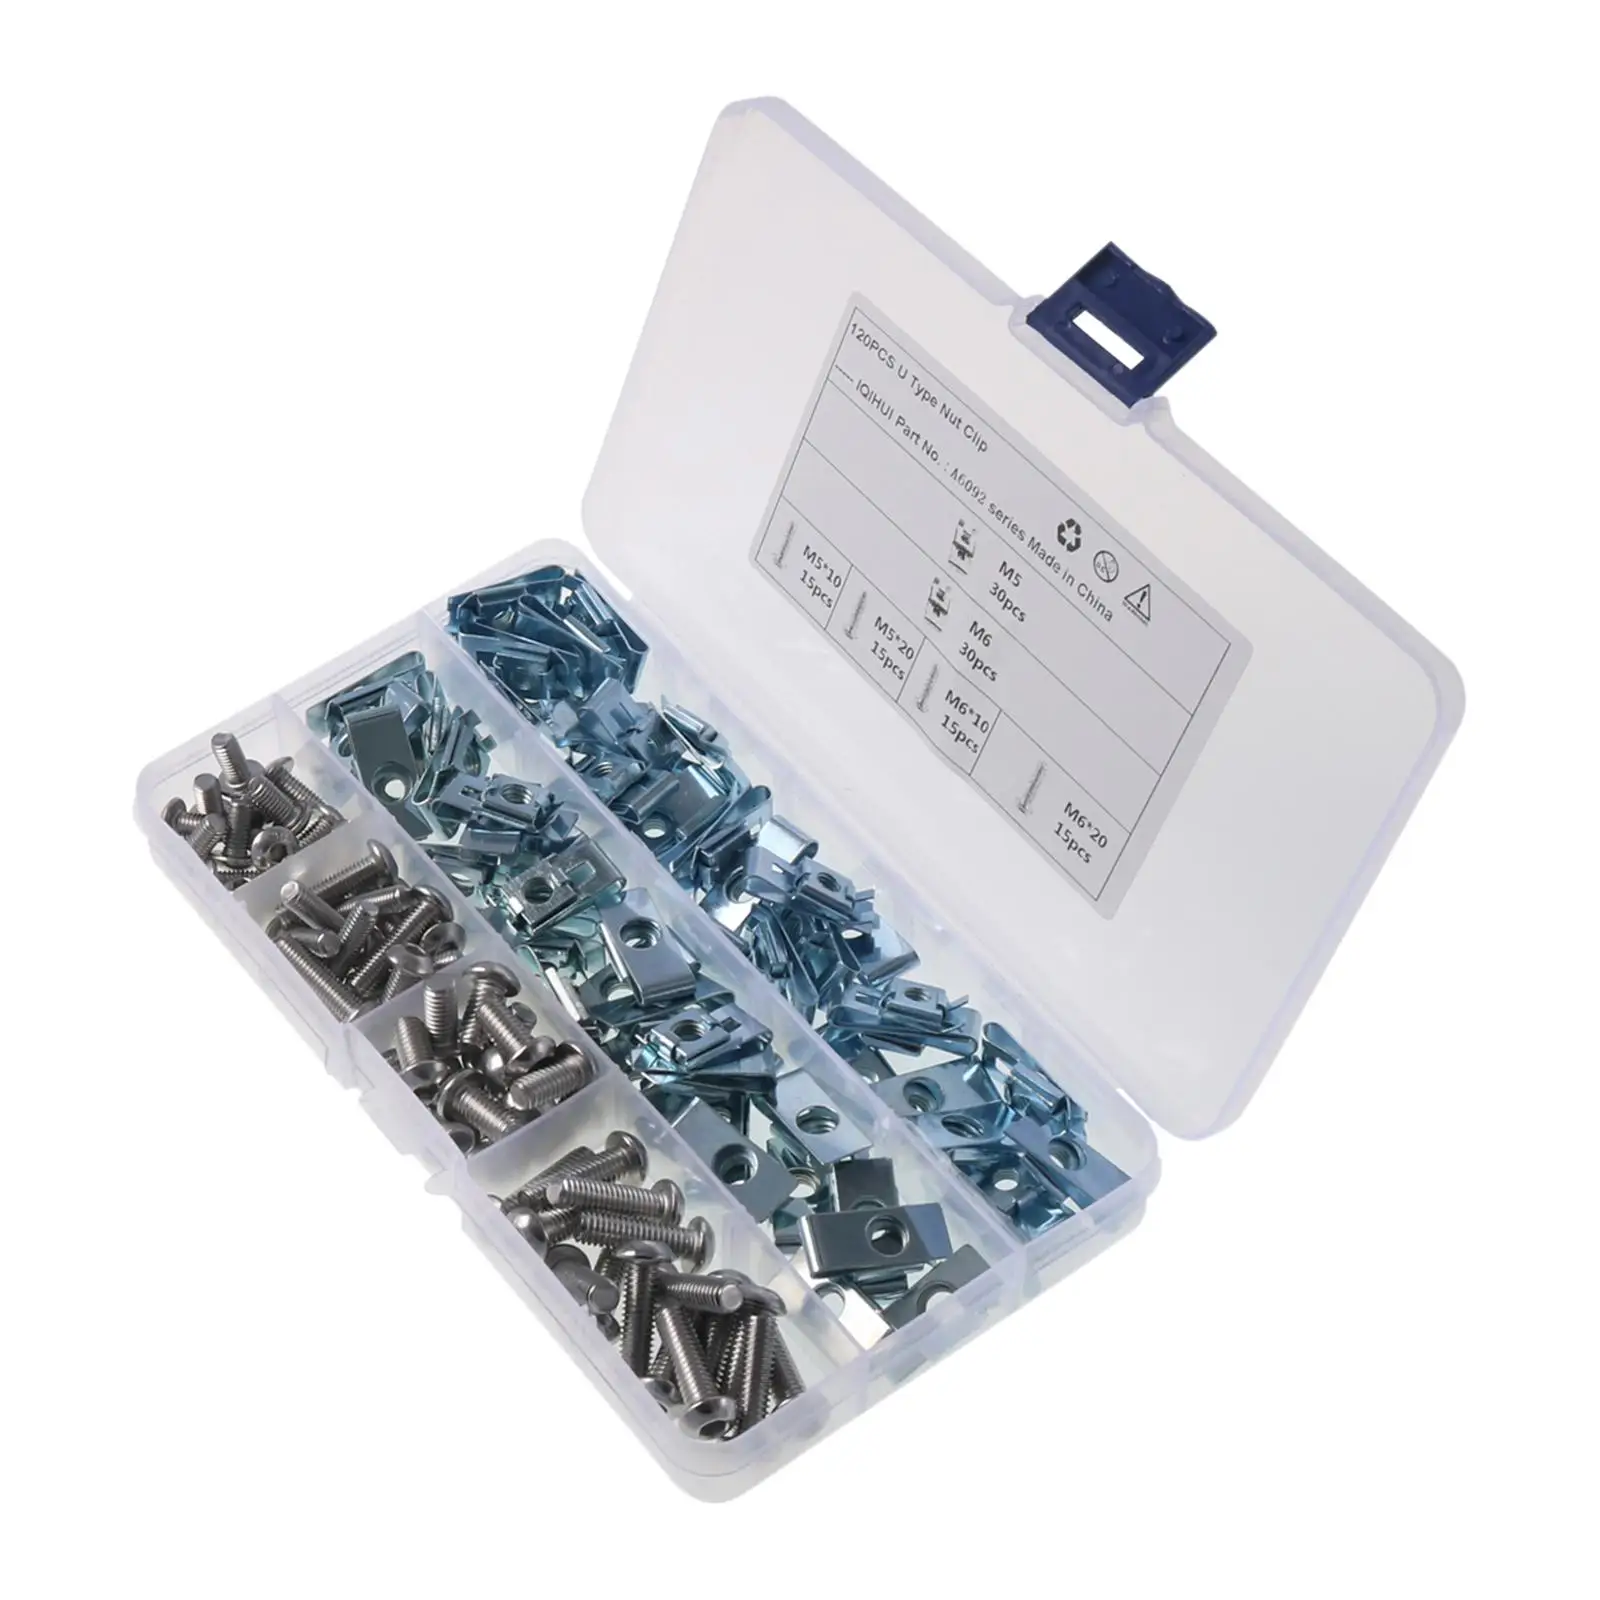 120x Screw Nut Clip Set Replaces Fastener for Car Tractor Motorcycle